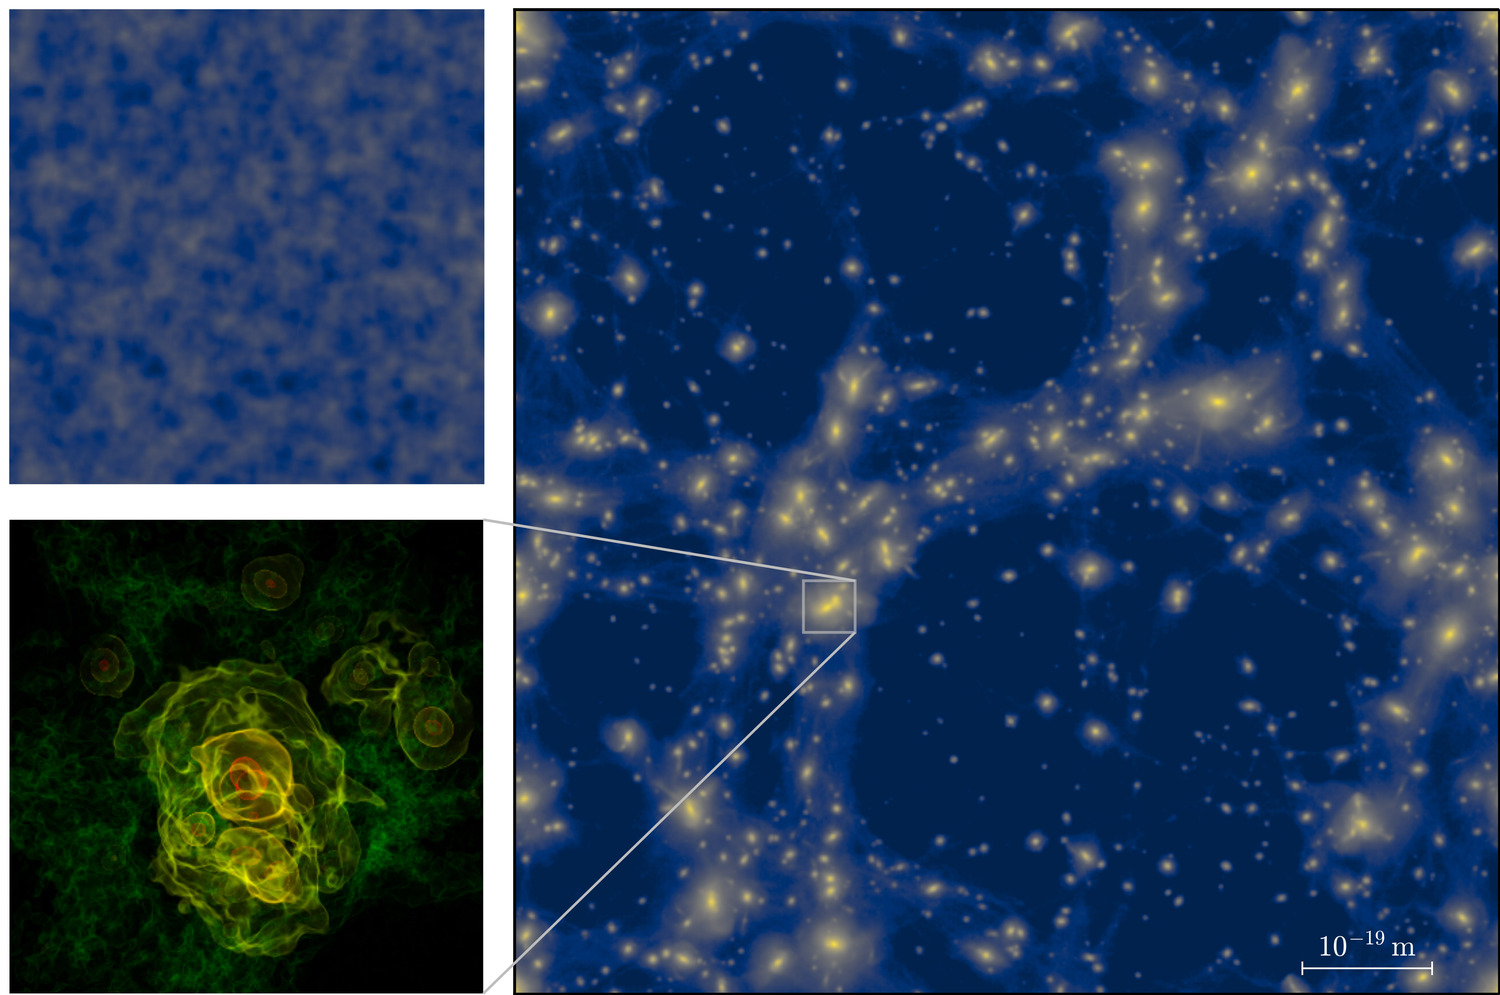 The results of the simulation show the growth of tiny, extremely dense structures very soon after the inflation phase of the very early universe. Between the initial and final states in the simulation (top left and right respectively), the area shown has expanded to ten million times its initial volume, but is still many times smaller than the interior of a proton. The enlarged clump at the bottom left would have a mass of about 20kg.